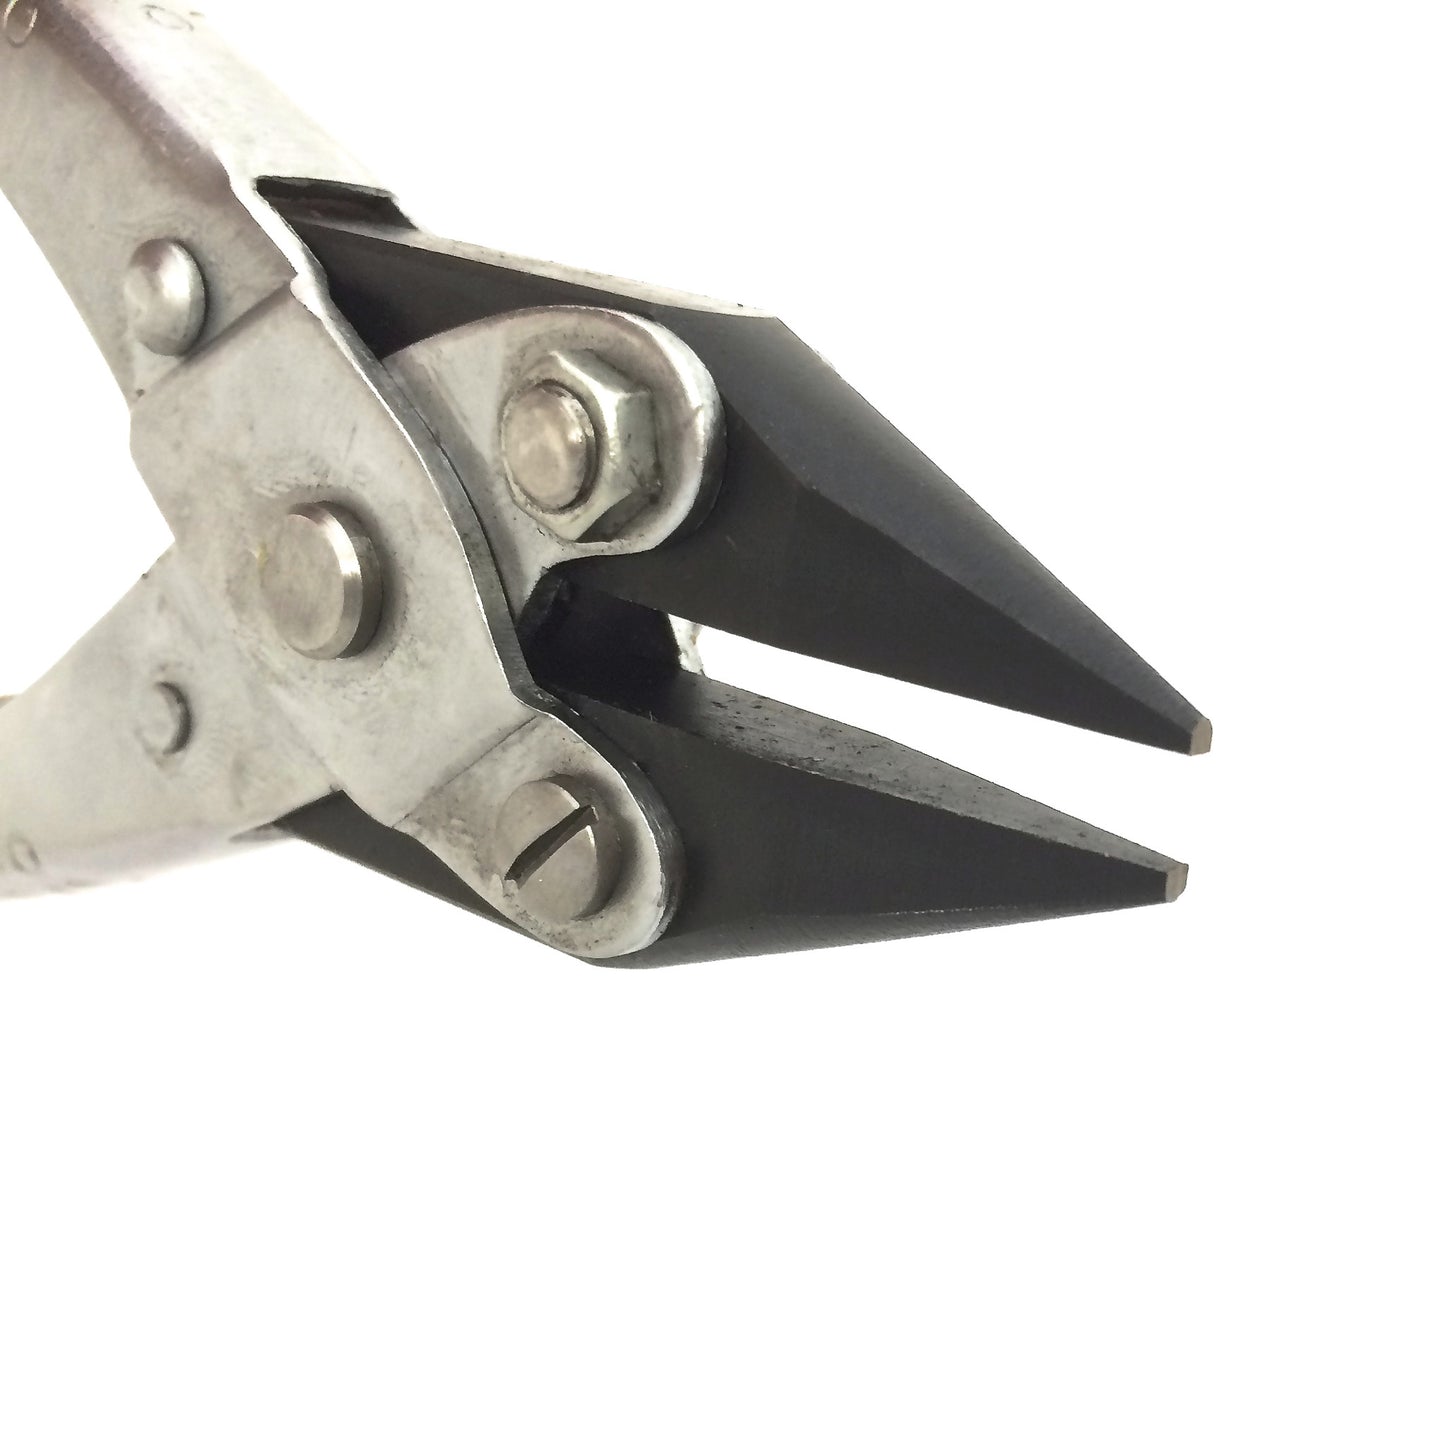 Parallel Jaw Pliers - Chain Nose (TLB23B)